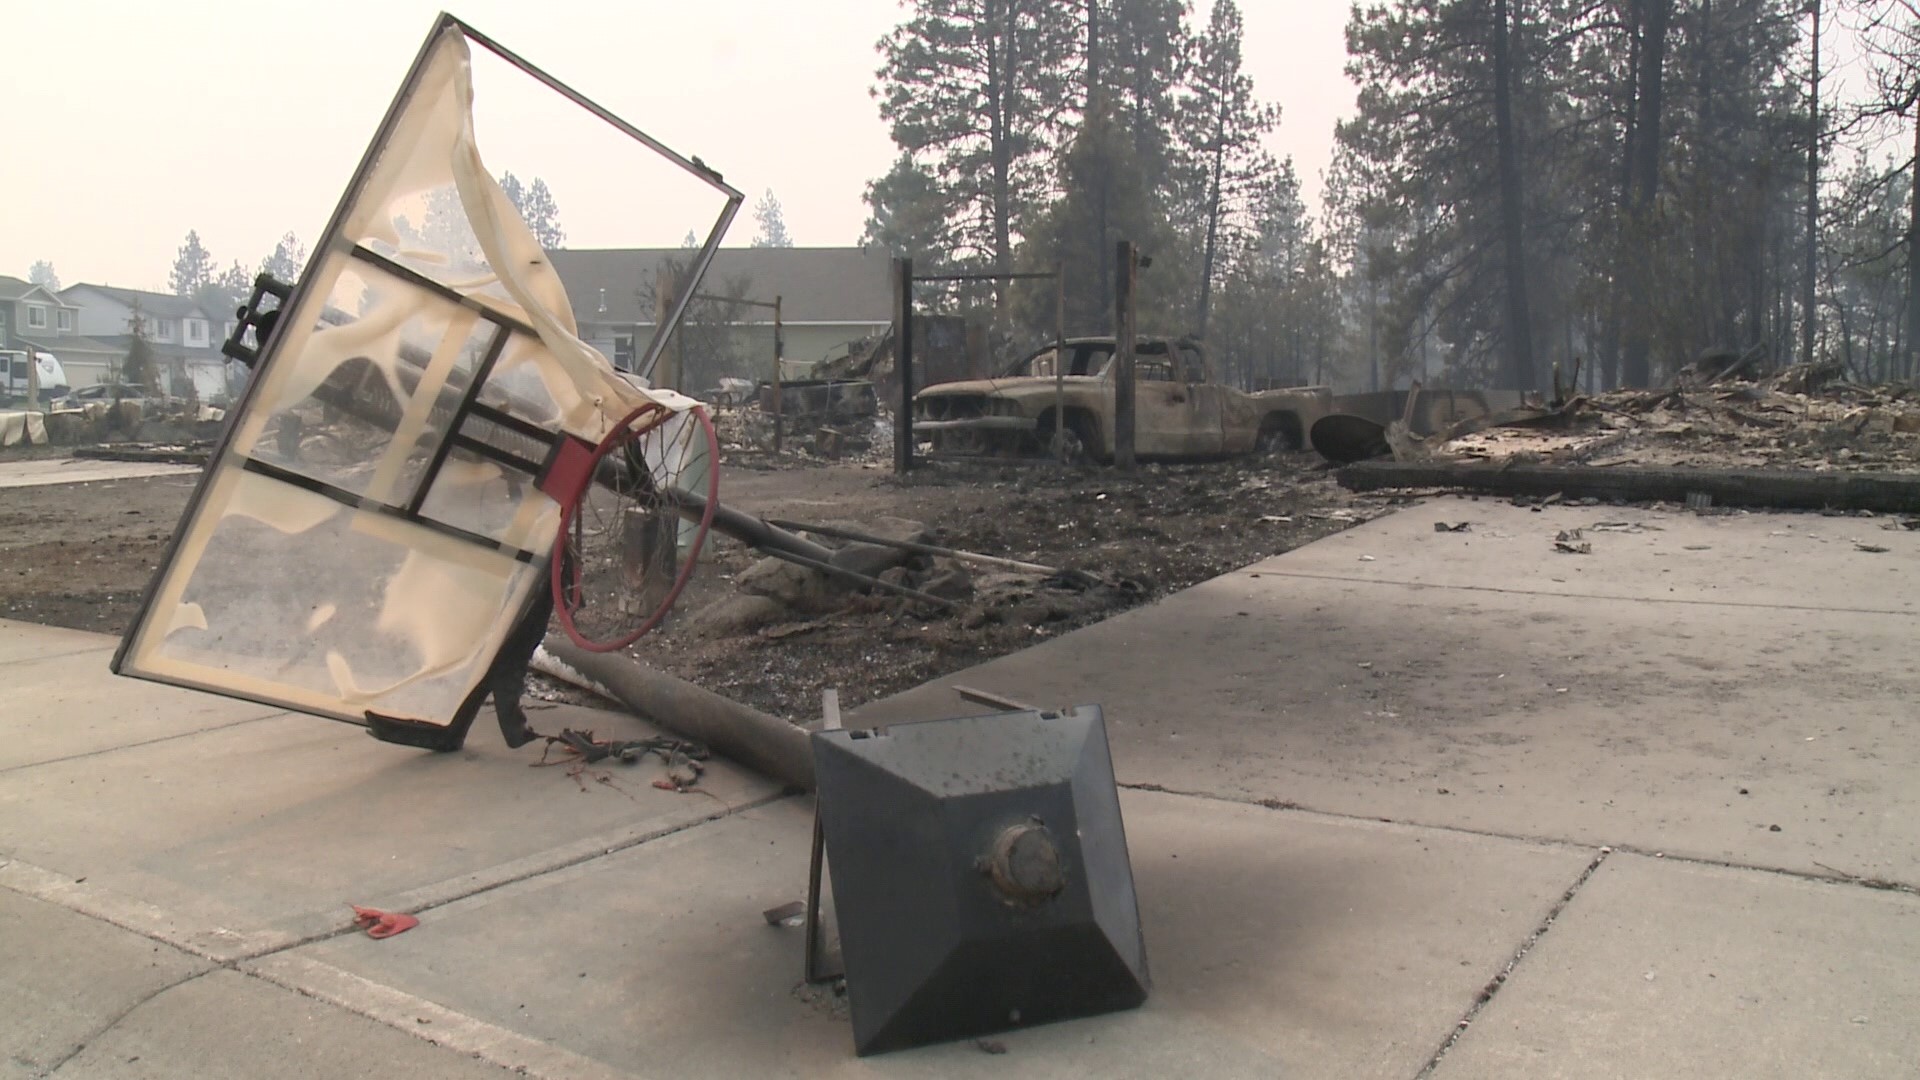 KREM 2 News at 11 brings you the latest updates on the devastating wildfires burning in Spokane County.